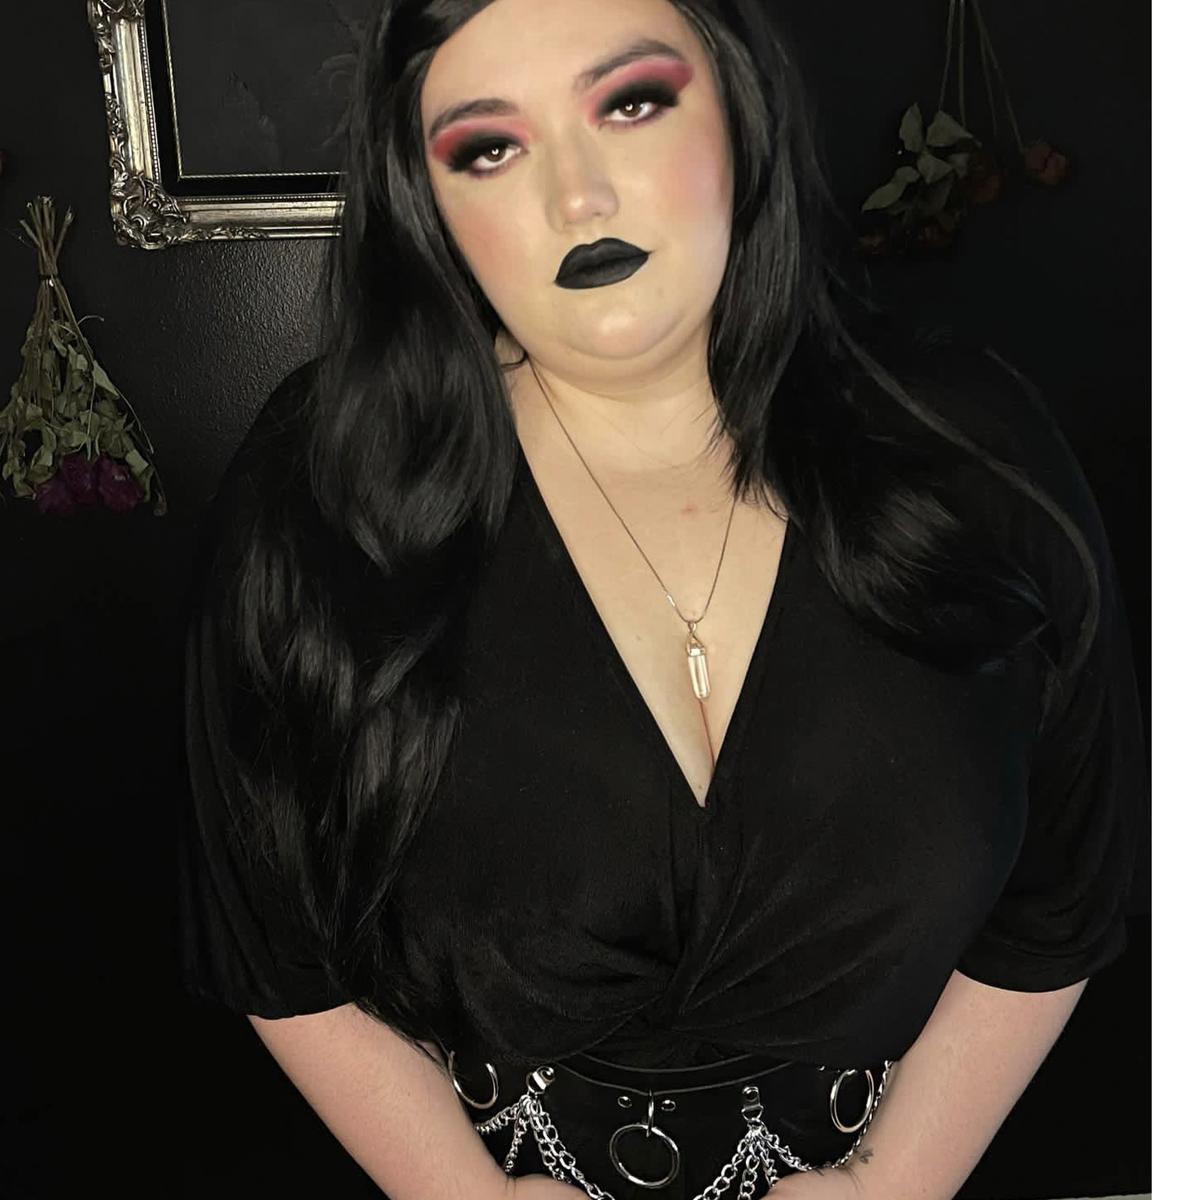 SpookyStormie🖤's images